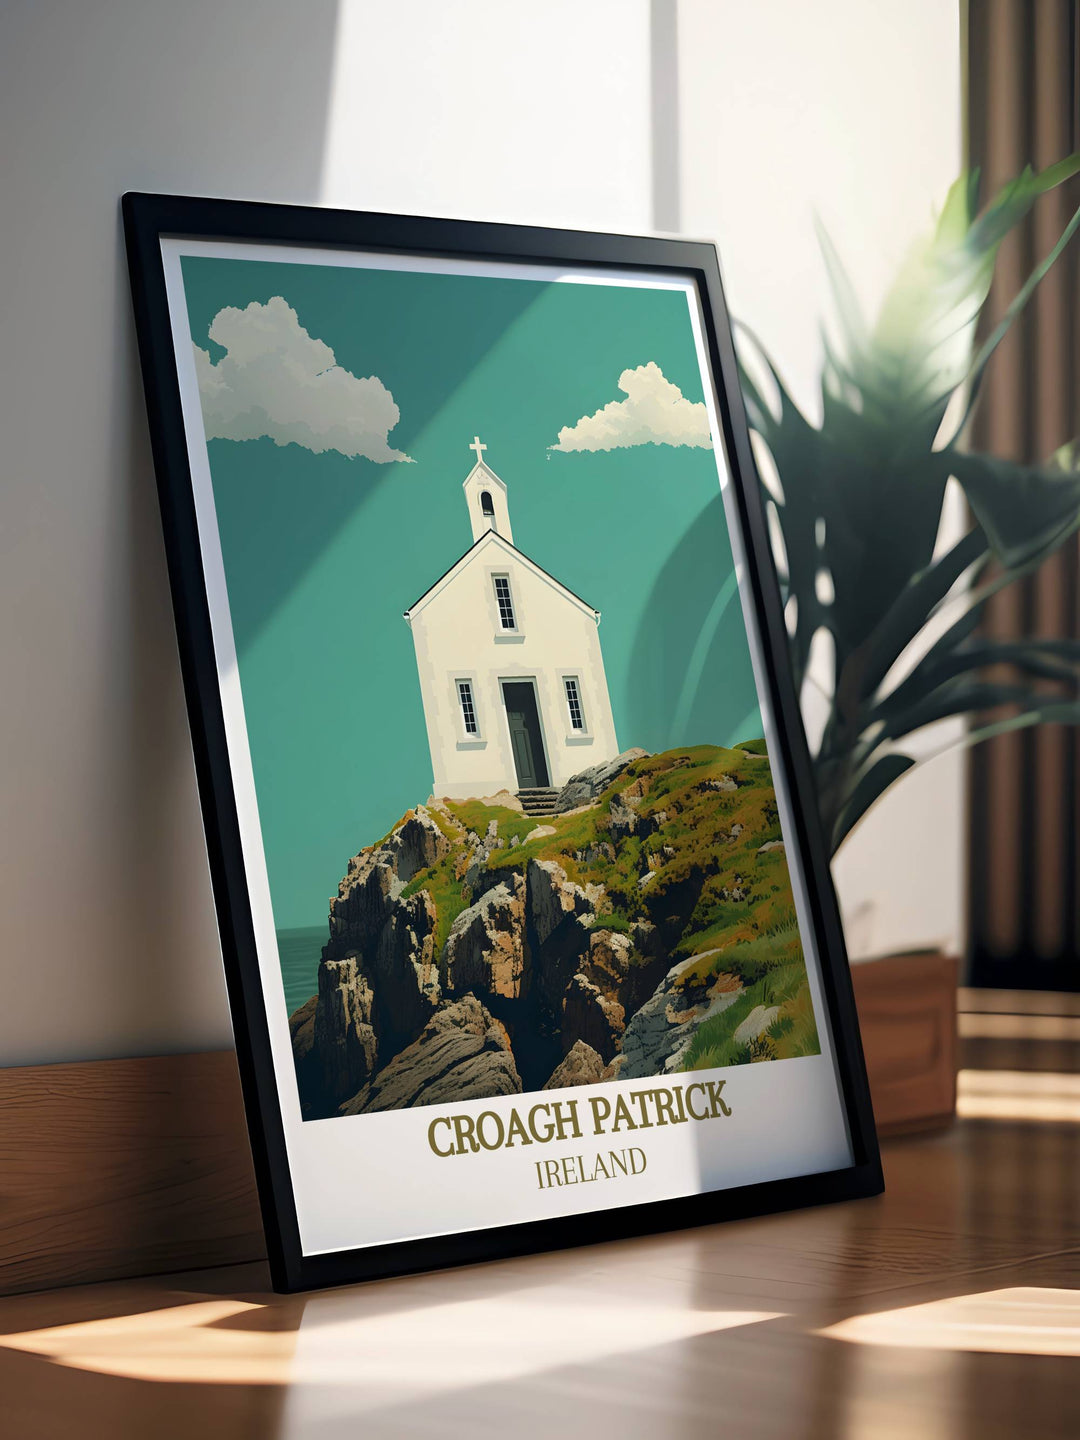 A breathtaking depiction of St Patricks Church and the iconic Croagh Patrick Trail capturing the spiritual journey and natural beauty of County Mayo Ireland. This Irish wall art print is ideal for travel enthusiasts and those who appreciate Irish history.